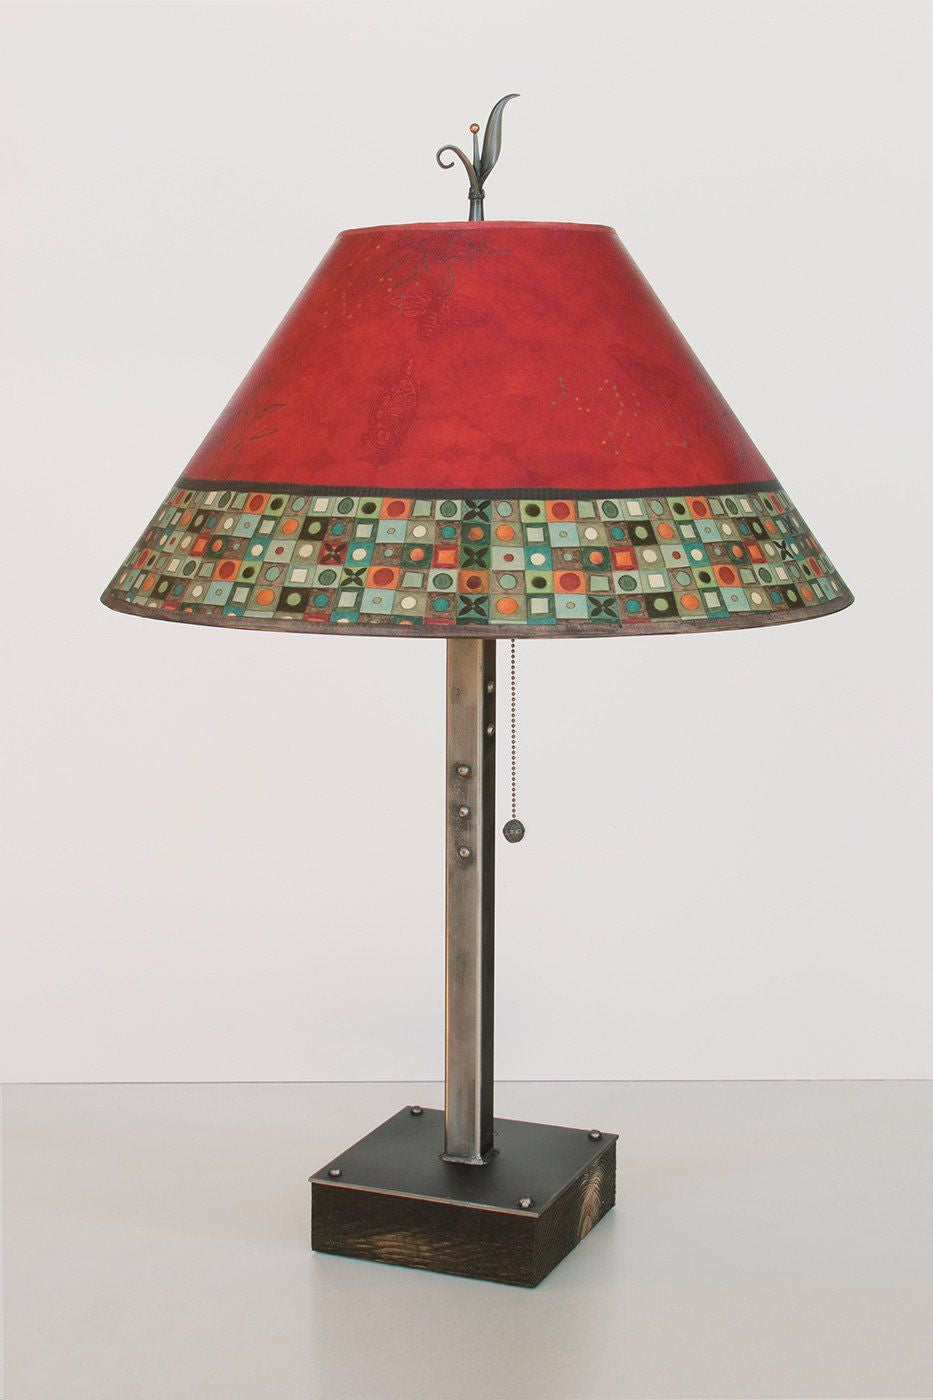 Steel Table Lamp on Wood with Large Conical Shade in Red Mosaic